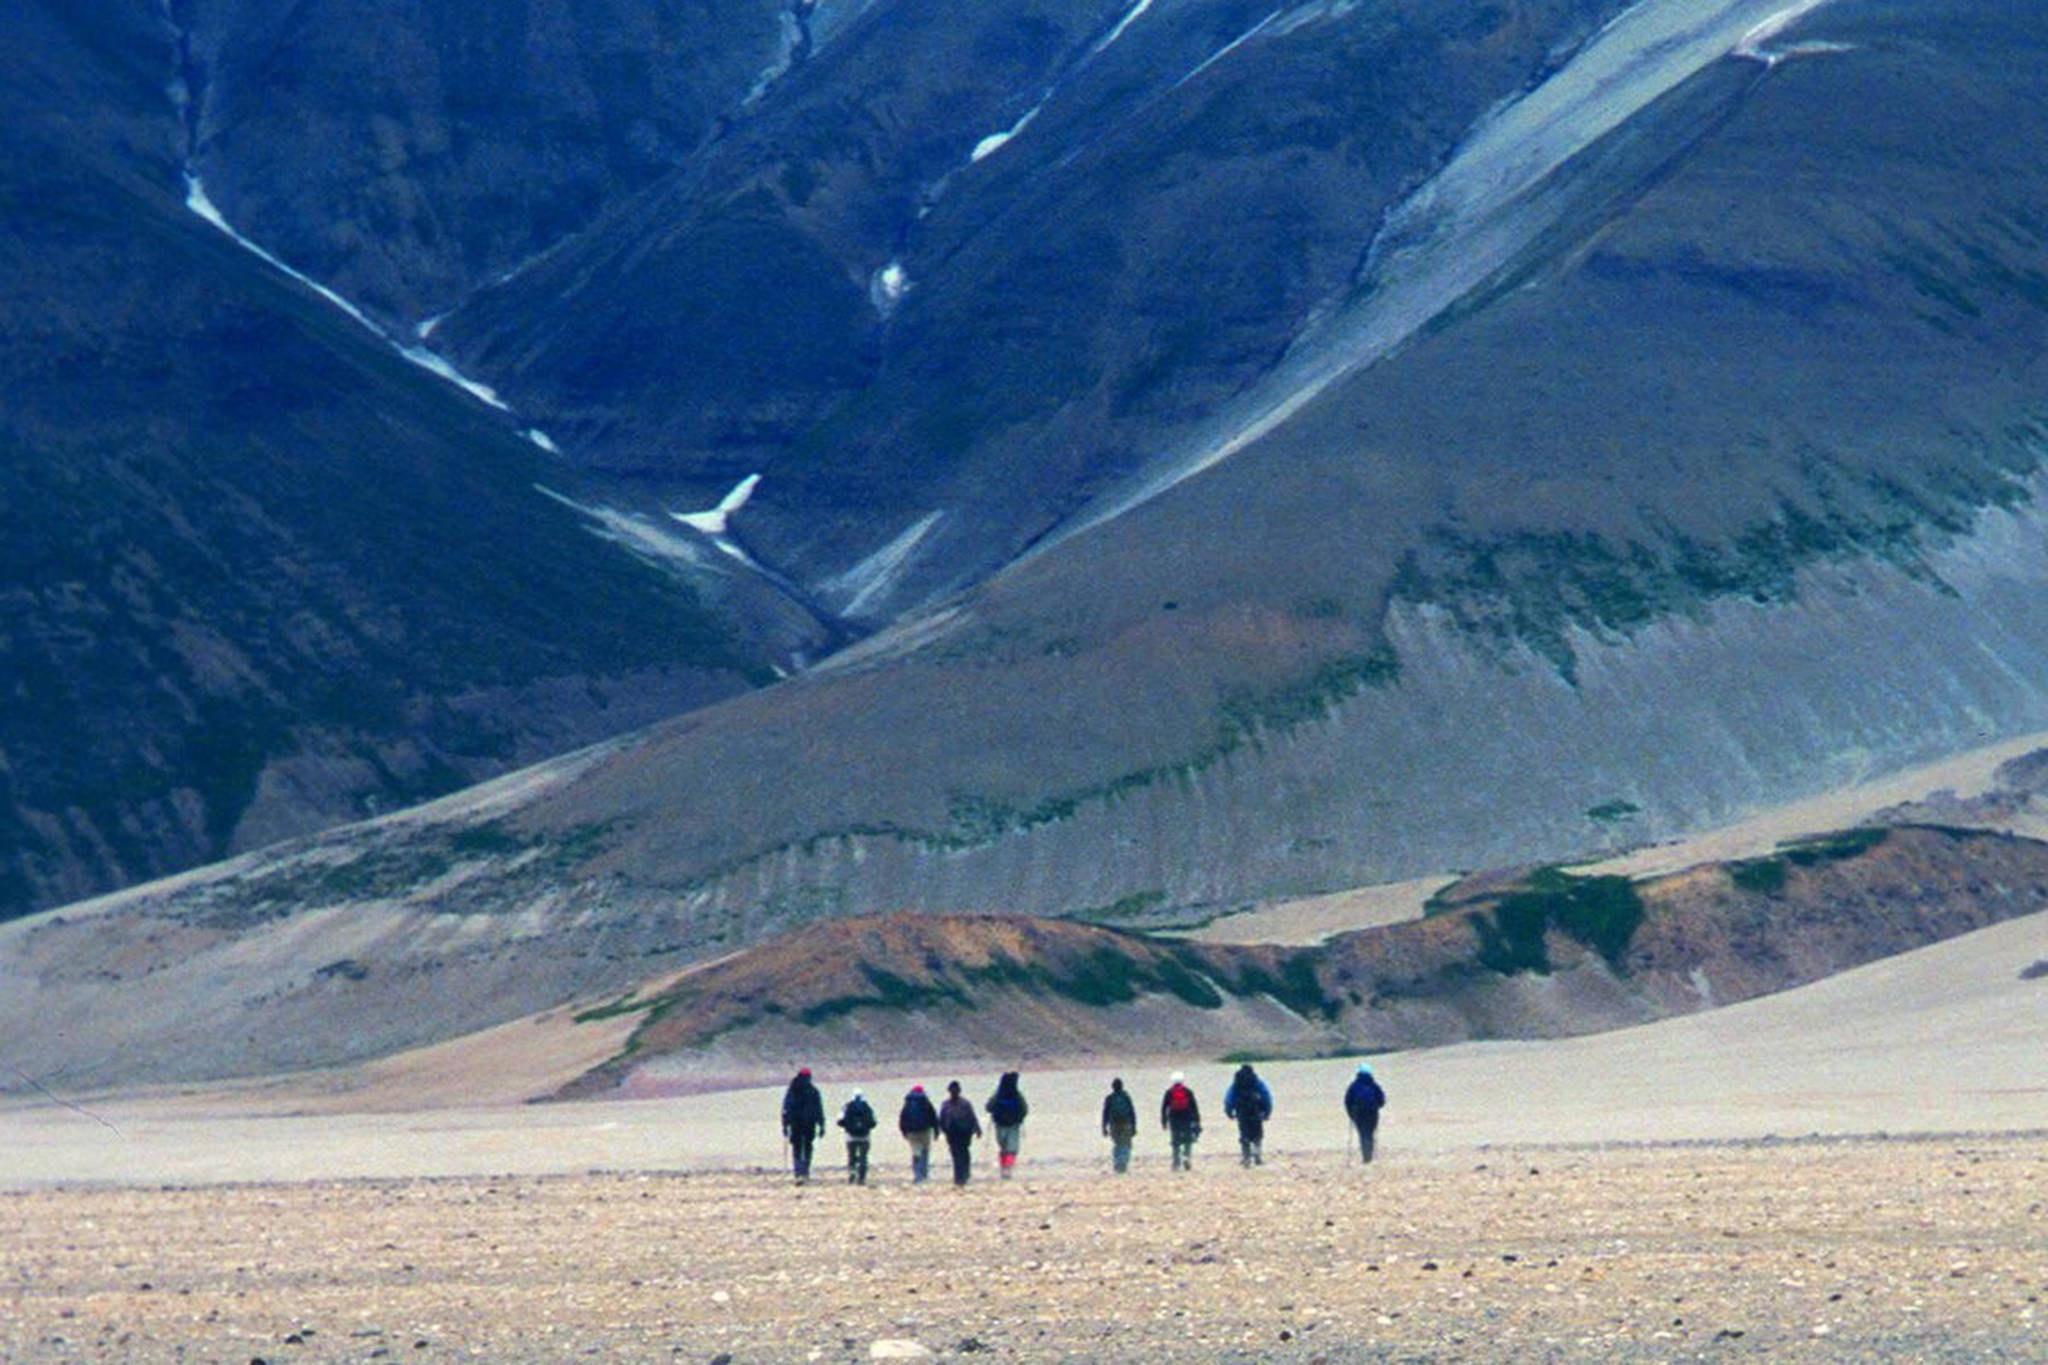 Hikers traverse the Valley of Ten Thousand Smokes on the Alaska Peninsula, walking on a sheet of ash and volcanic rock more than 500-feet thick. (Courtesy Photo / Ned Rozell)